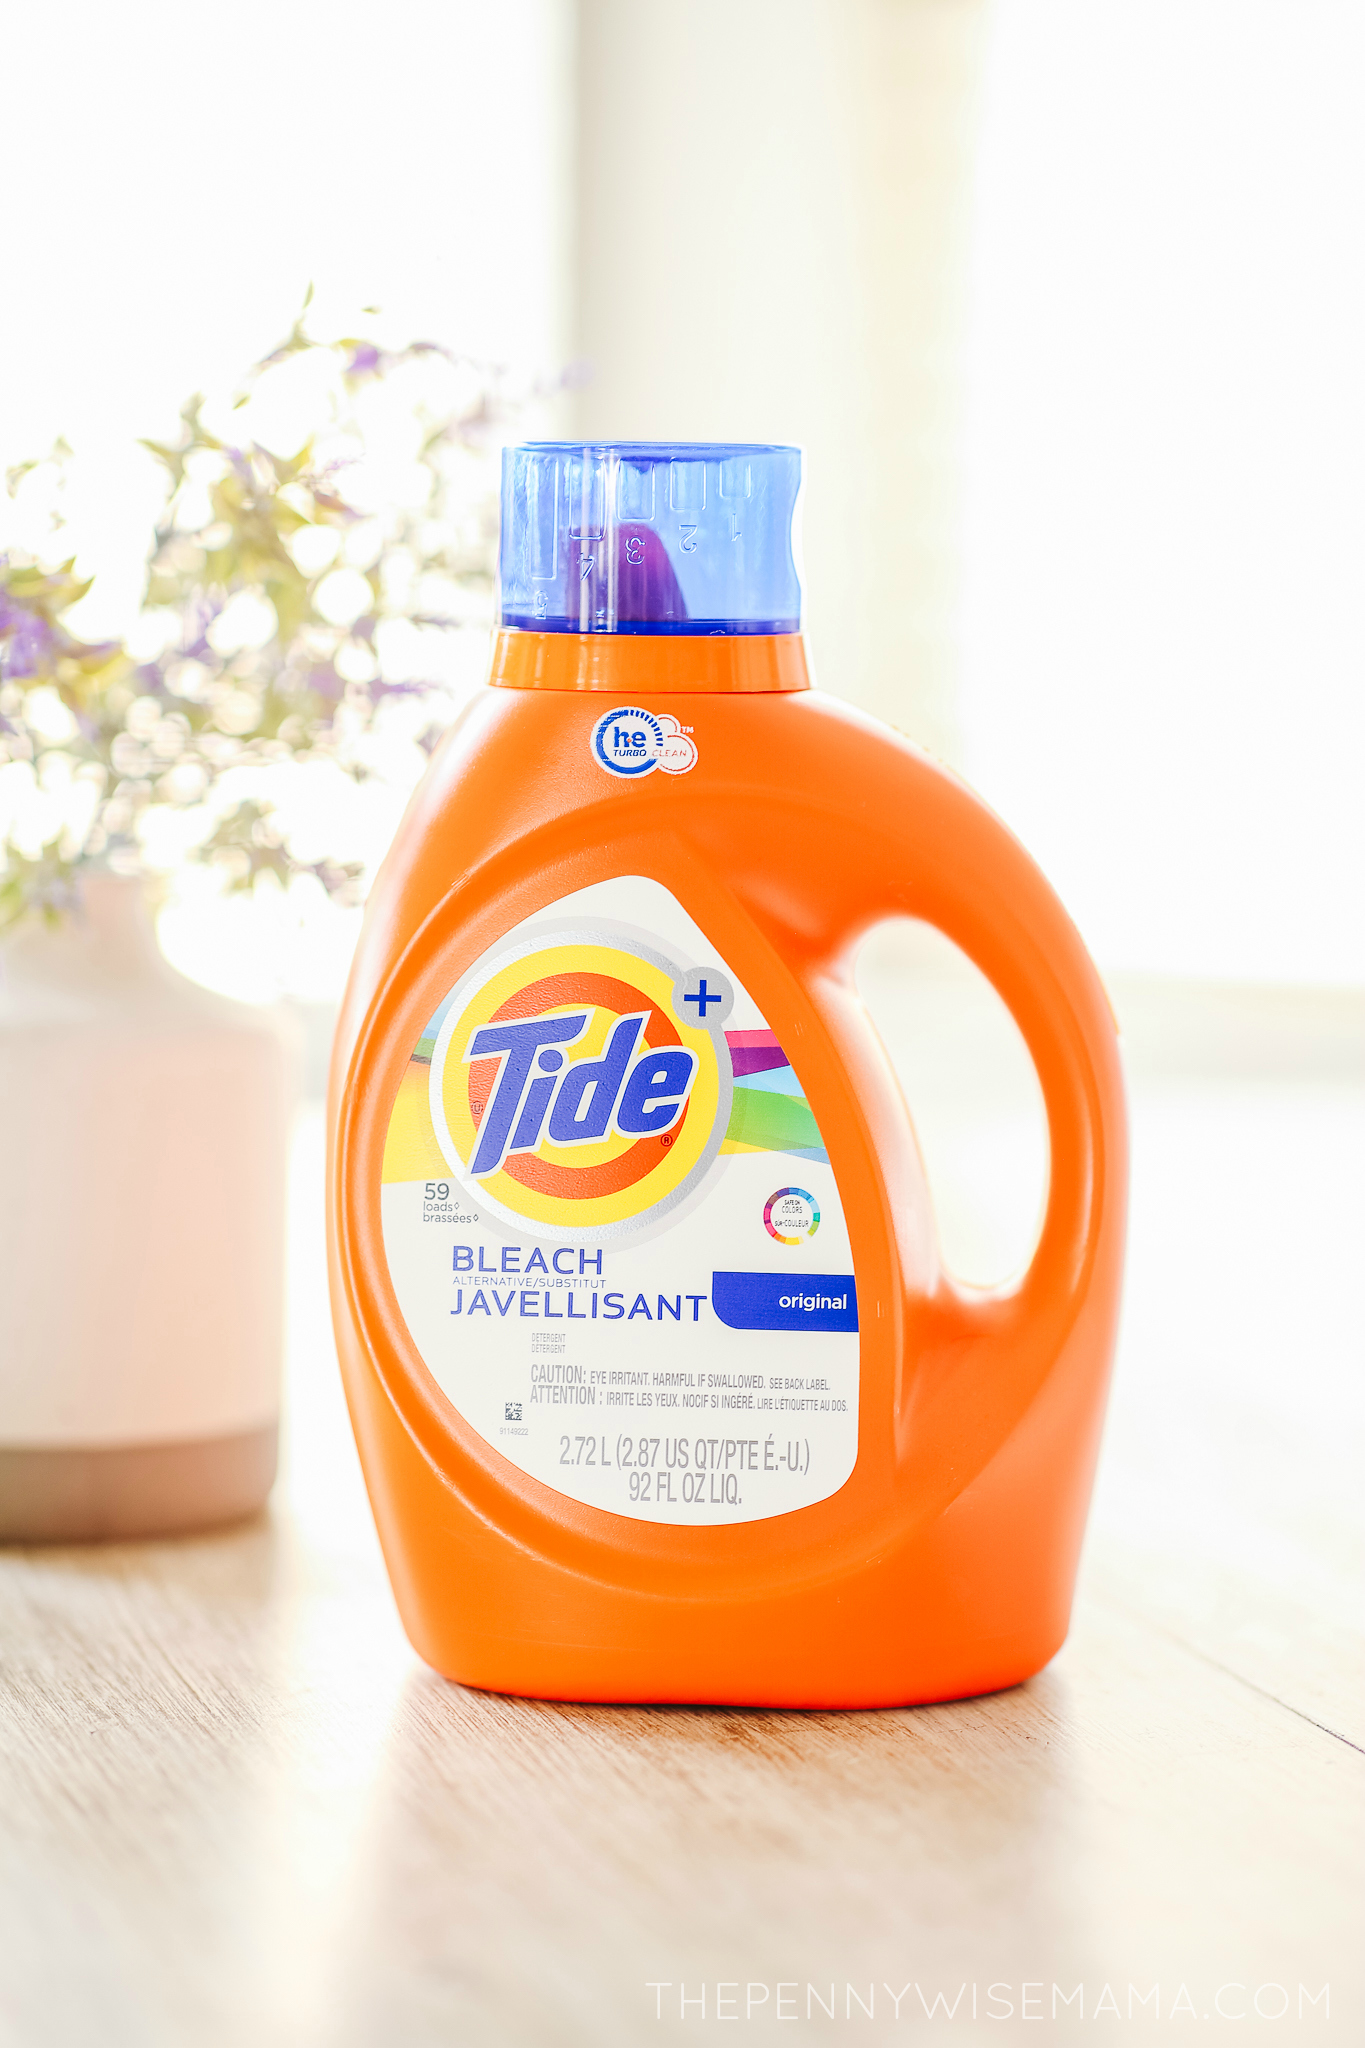 Earn Rewards for Purchasing Tide Products at P&G Good Everyday